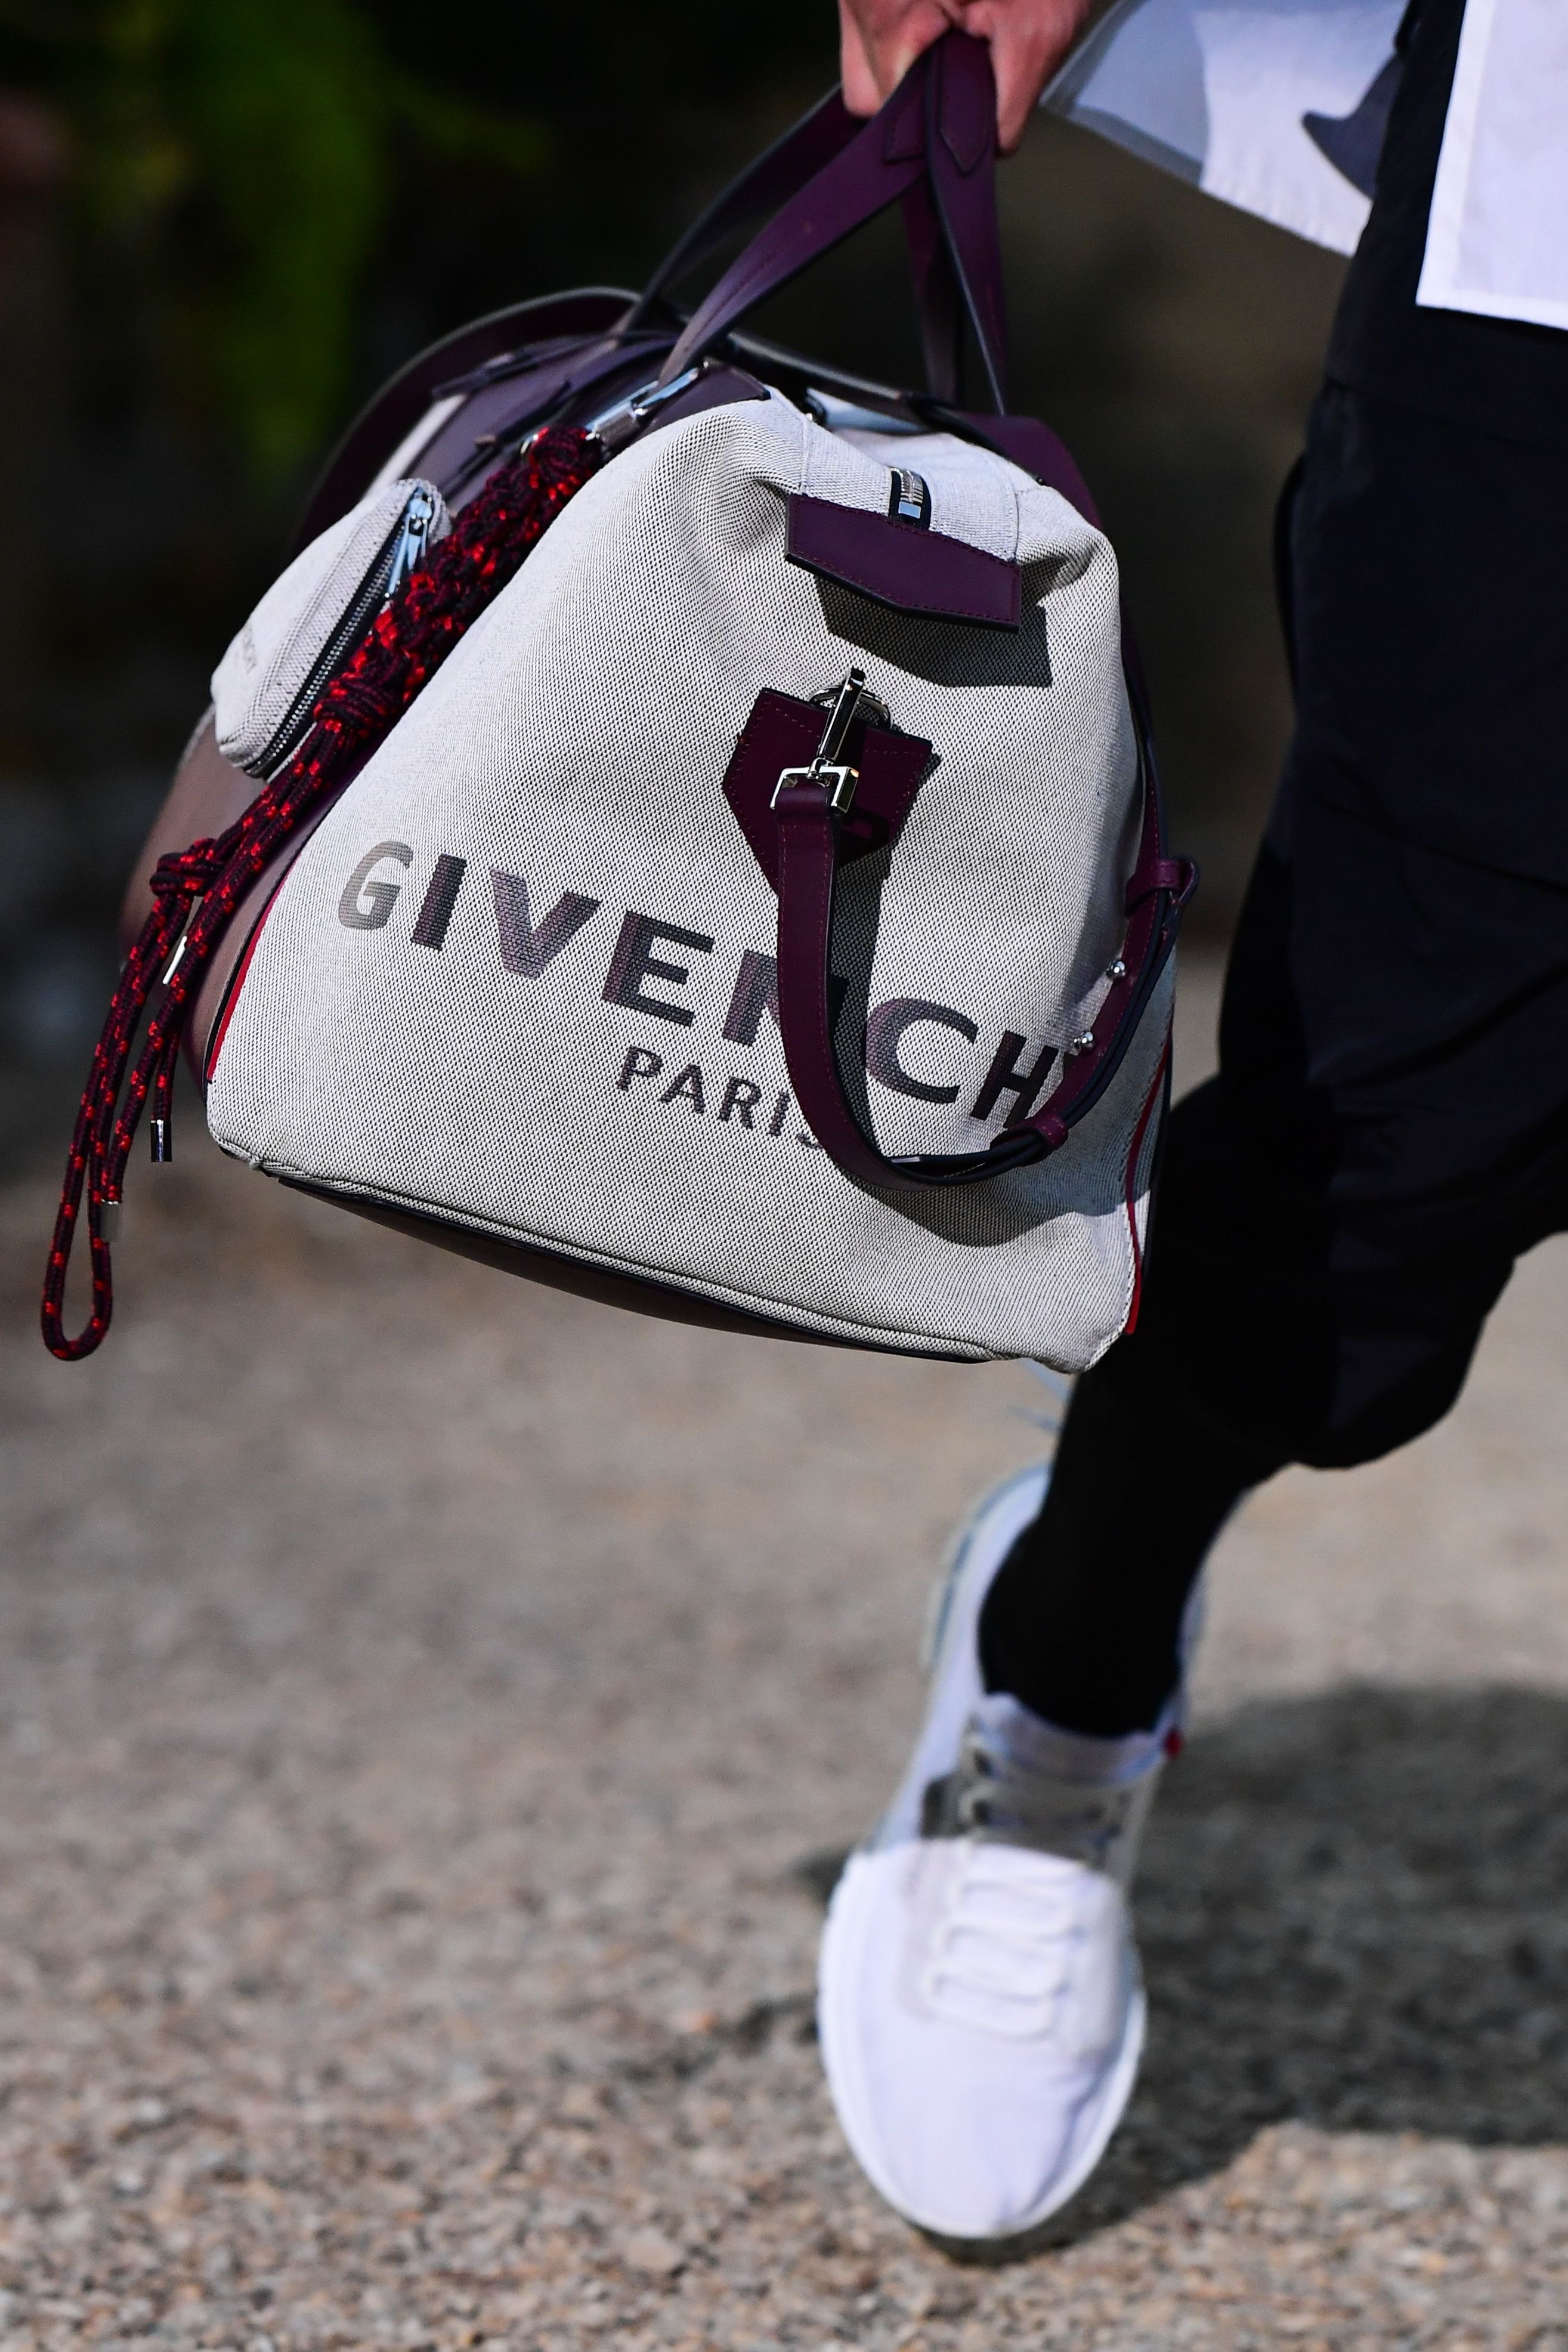 Coach, Givenchy, And Versace Have Apologized To Chinese Consumers For ...